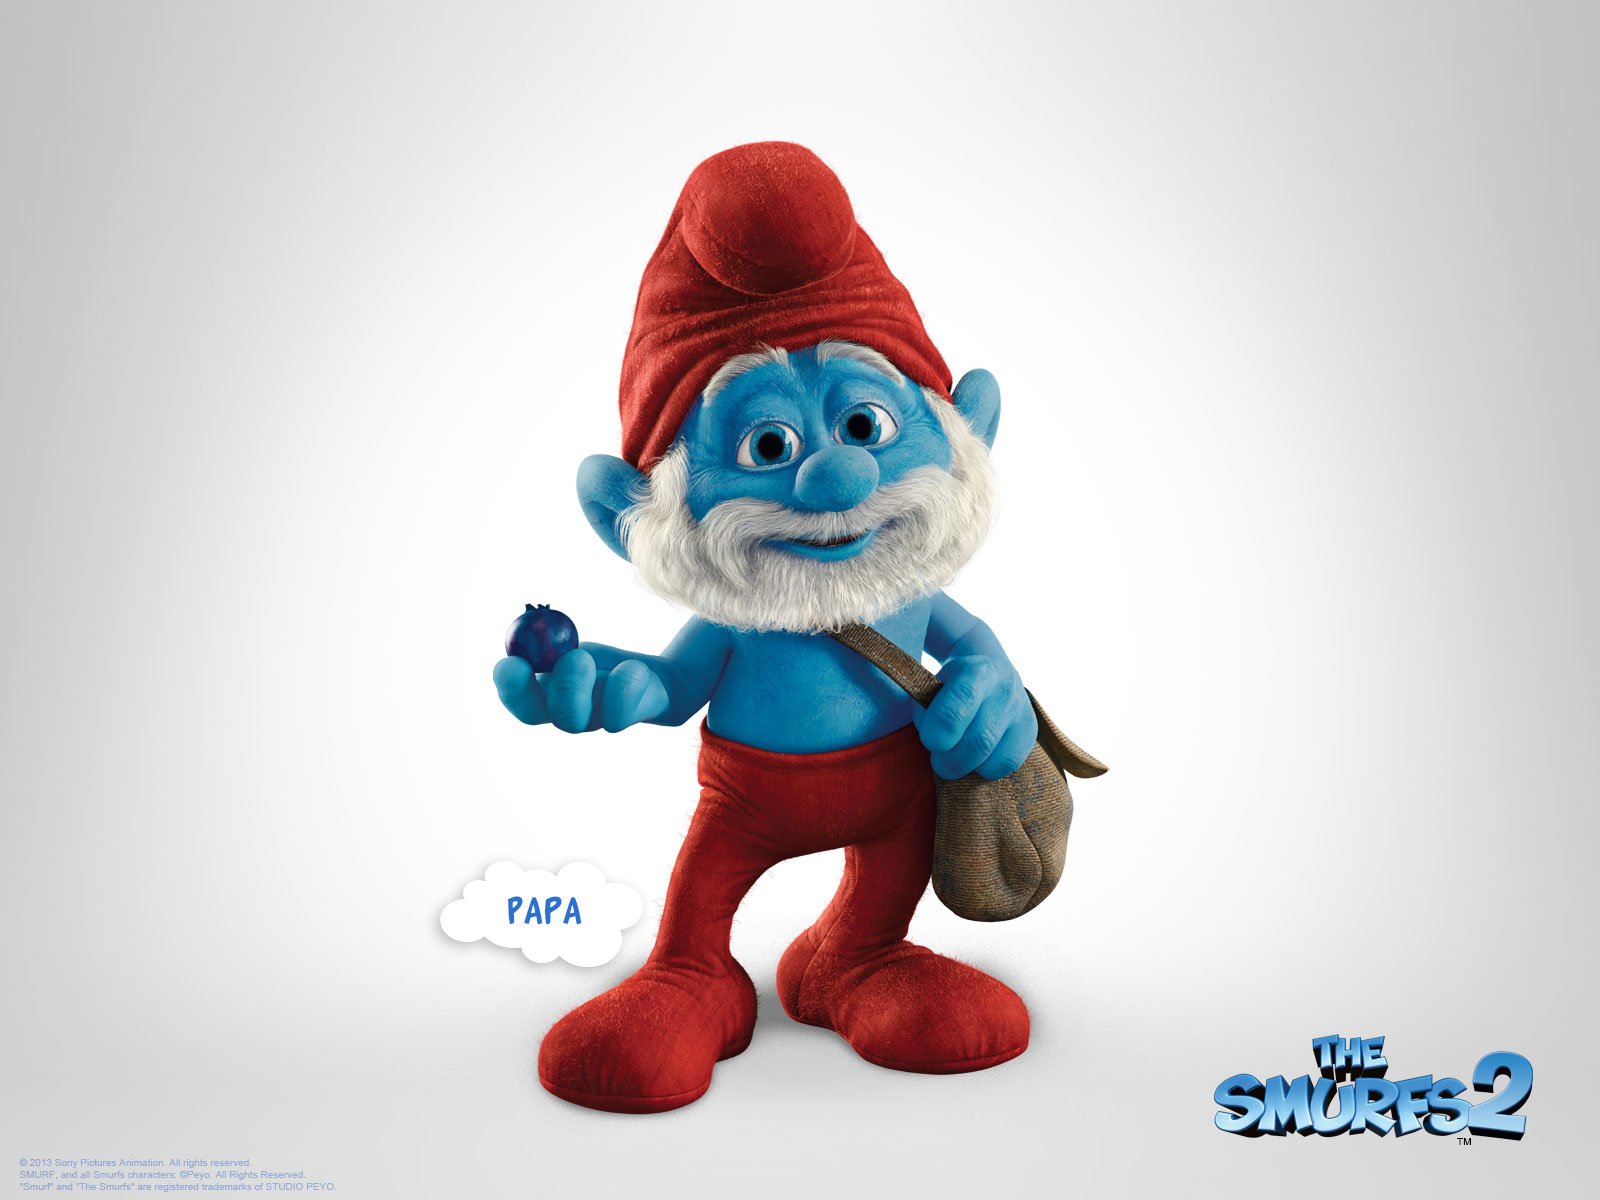 The Smurfs 2 2013 - YouTube